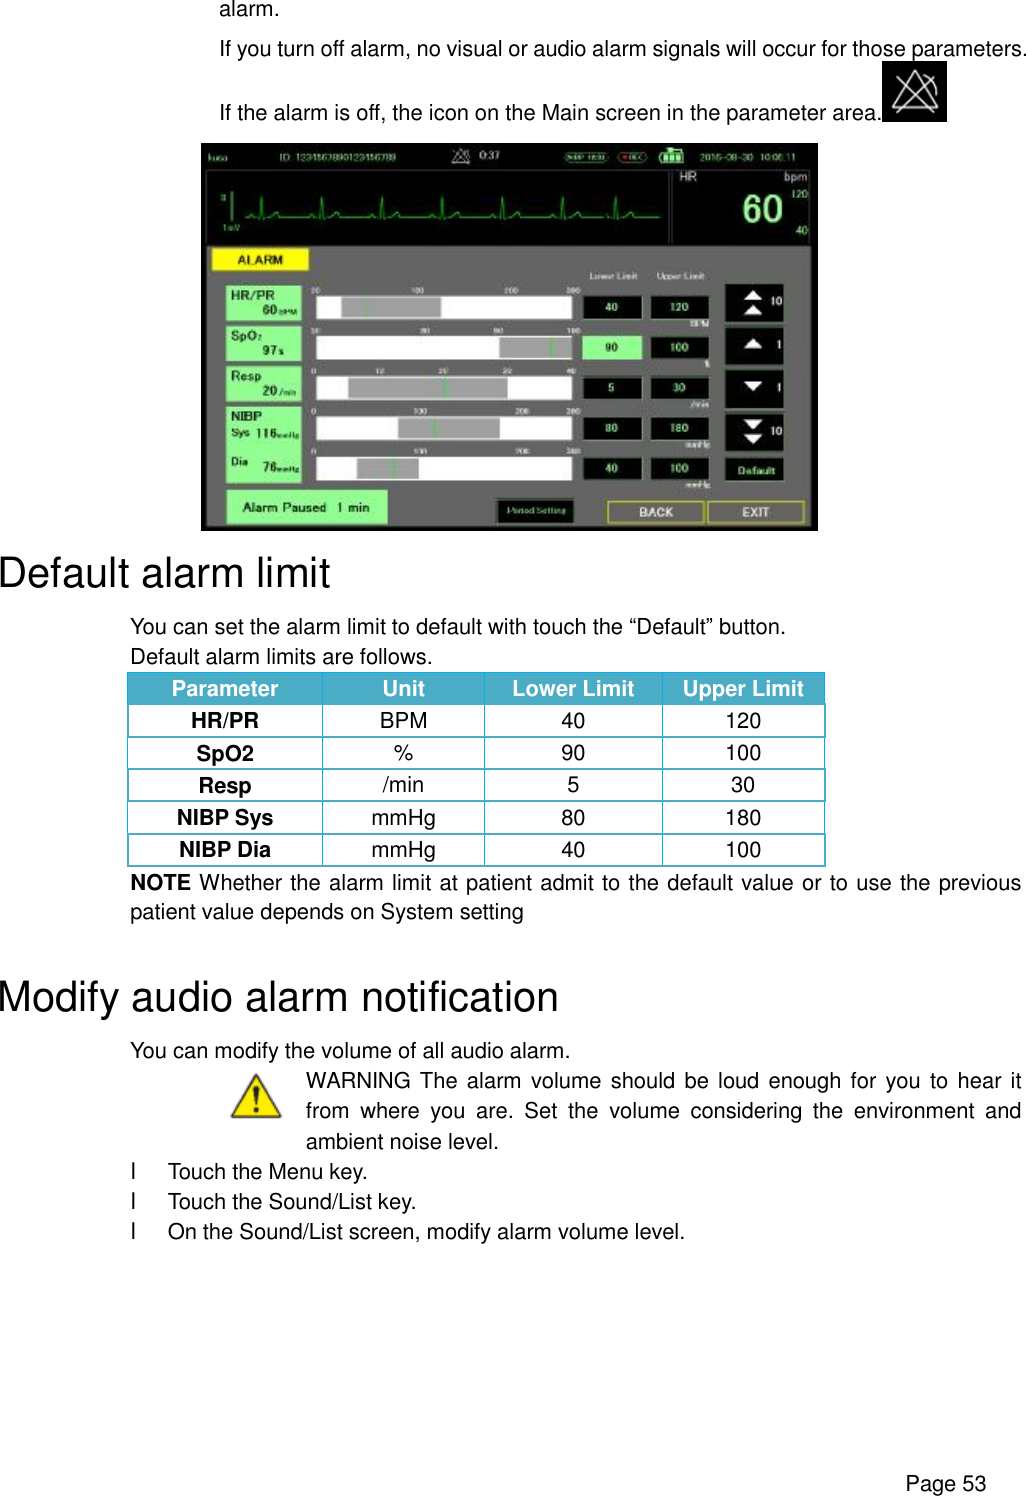      Page 53 alarm. If you turn off alarm, no visual or audio alarm signals will occur for those parameters. If the alarm is off, the icon on the Main screen in the parameter area.   Default alarm limit You can set the alarm limit to default with touch the “Default” button. Default alarm limits are follows. Parameter  Unit  Lower Limit  Upper Limit HR/PR  BPM  40  120 SpO2  %  90  100 Resp  /min  5  30 NIBP Sys  mmHg  80  180 NIBP Dia  mmHg  40  100 NOTE Whether the alarm limit at patient admit to the default value or to use the previous patient value depends on System setting  Modify audio alarm notification You can modify the volume of all audio alarm.  WARNING The alarm volume should be loud enough for you to hear it from where you are. Set the volume considering the environment and ambient noise level. l Touch the Menu key. l Touch the Sound/List key. l On the Sound/List screen, modify alarm volume level. 